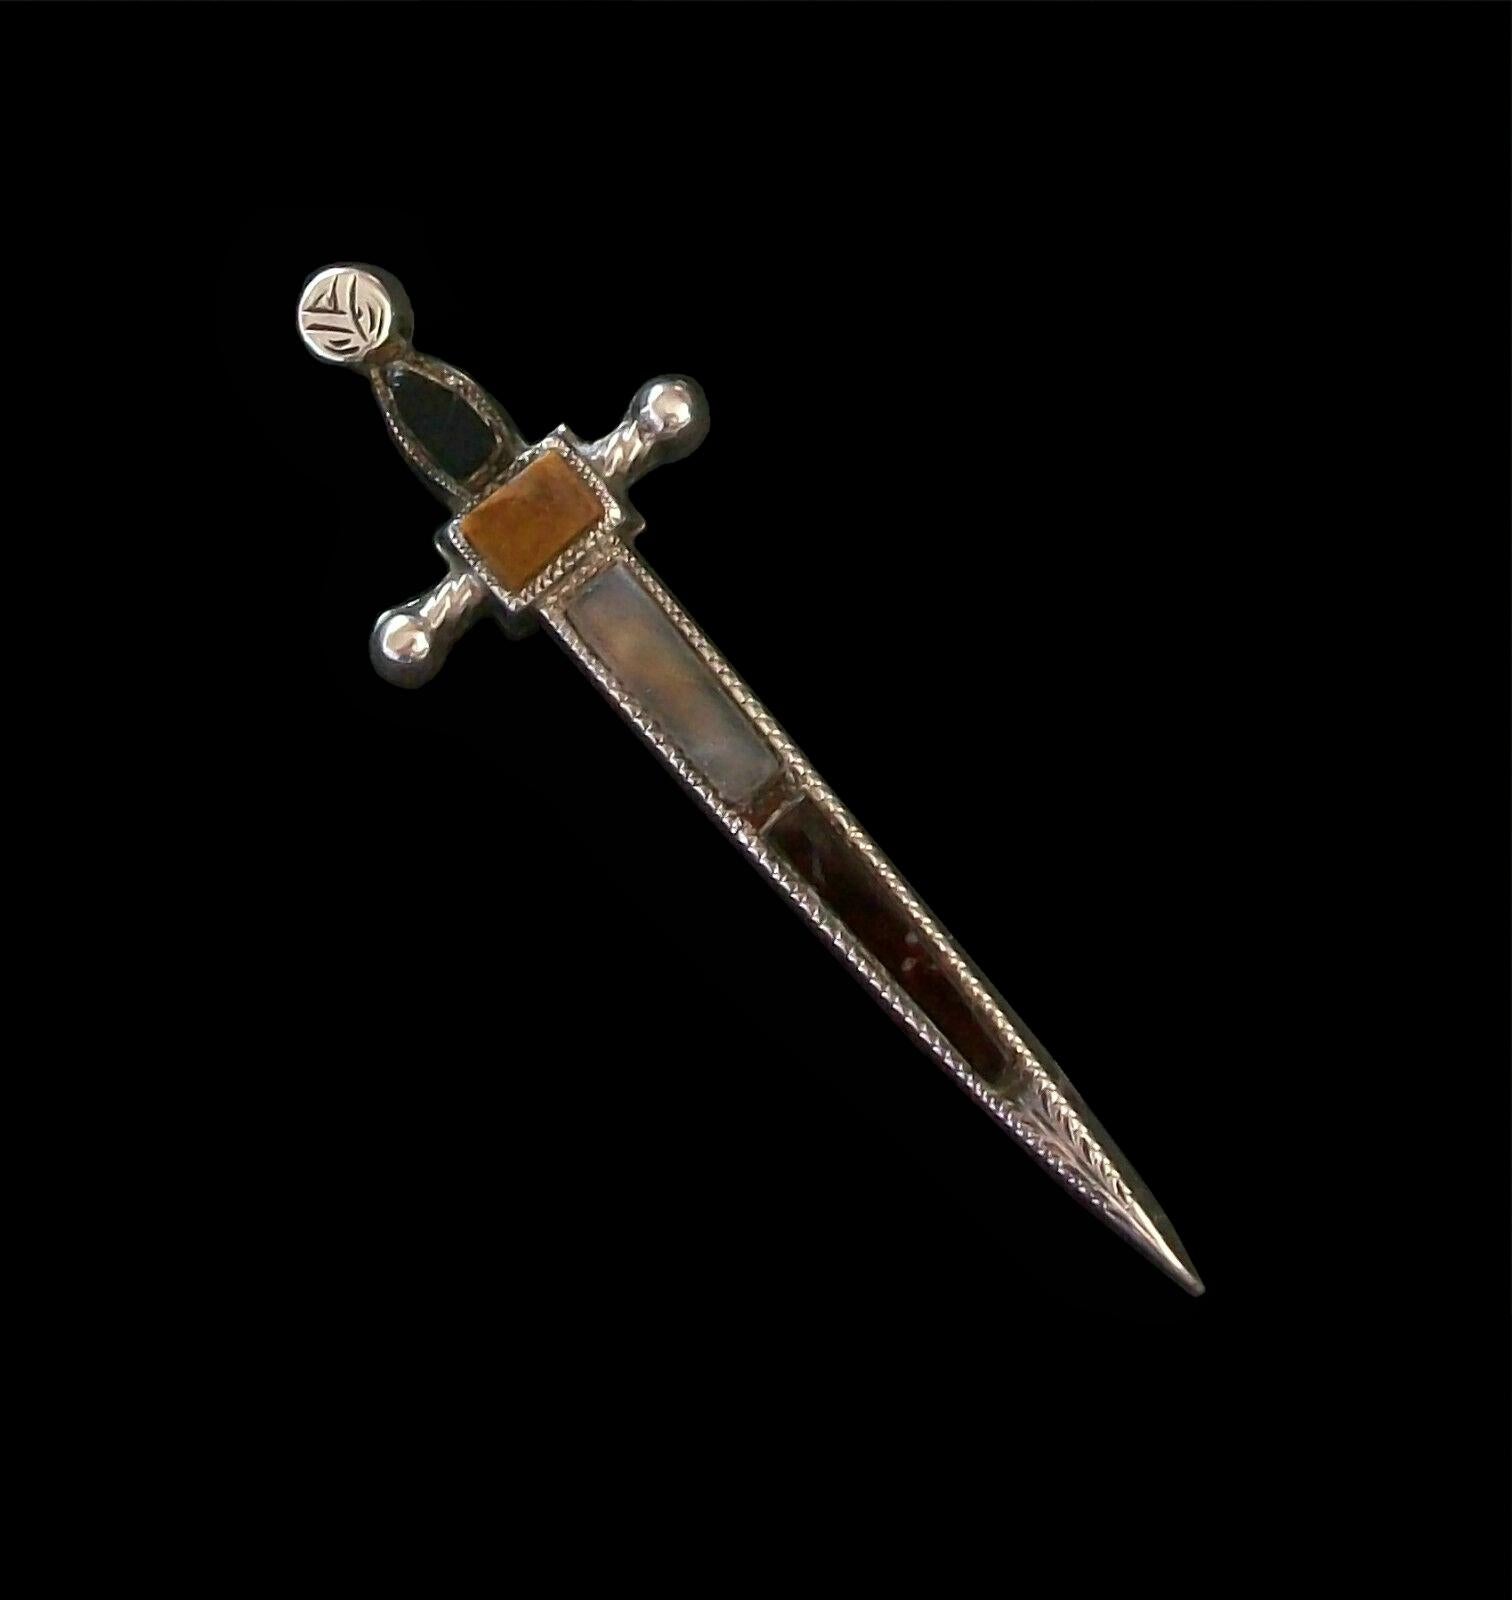 
J. COOK & SON - Antique sterling silver and agate dirk/dagger kilt pin or brooch - signed verso - Birmingham - United Kingdom - circa 1914.

Excellent antique condition - no loss - no damage - no repairs - tarnishing of the metal finish - surface